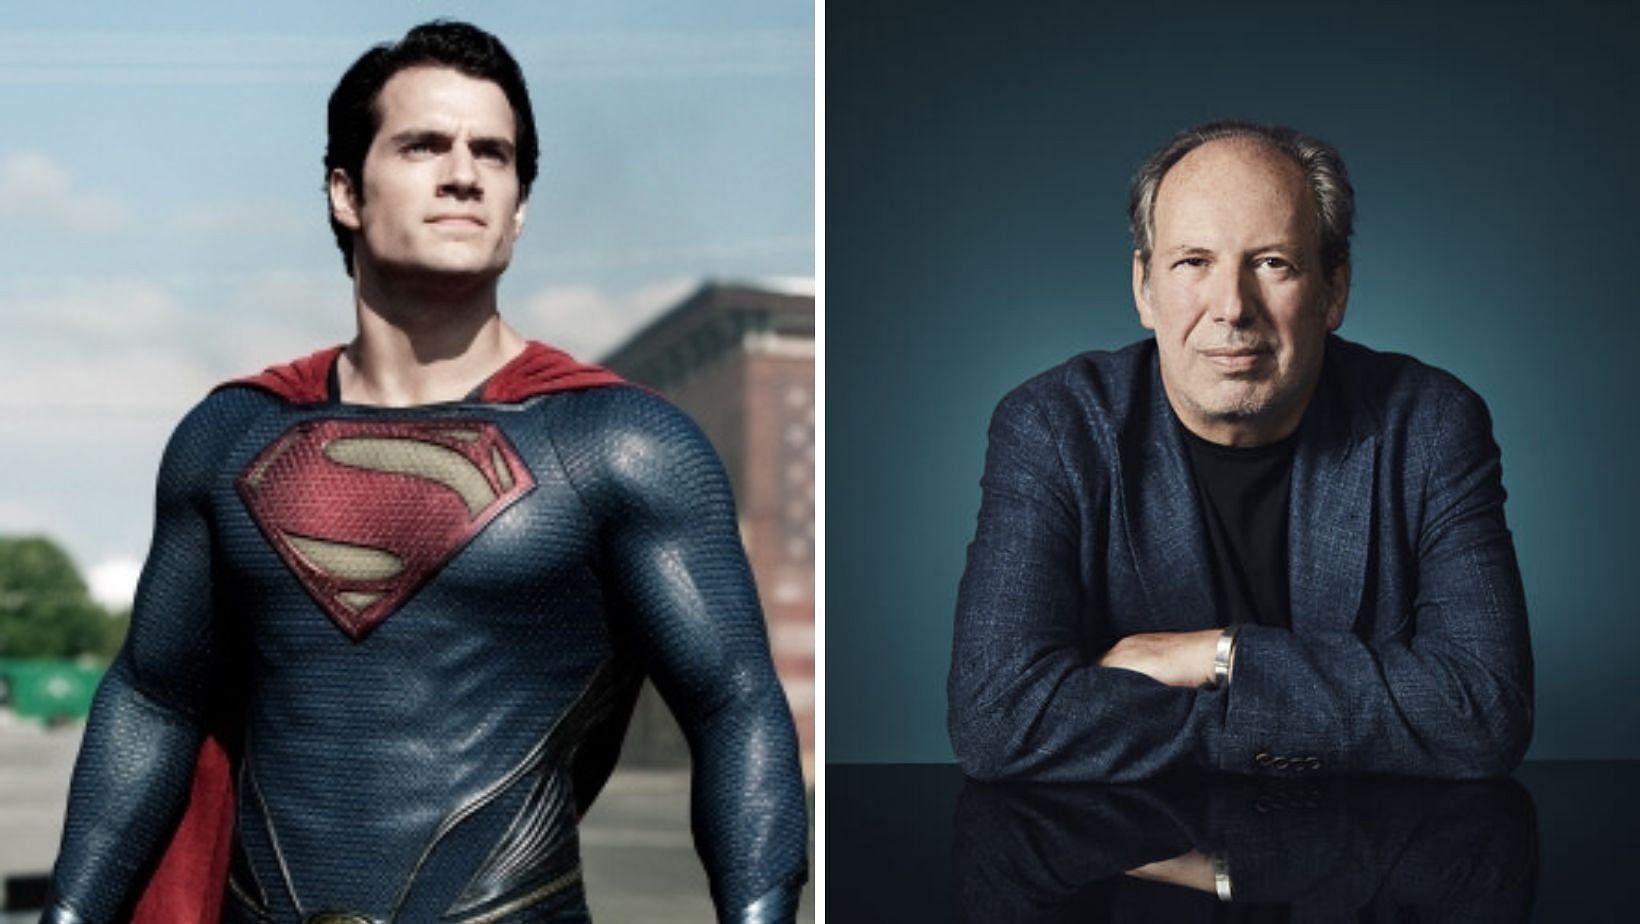 Hans Zimmer&#039;s iconic score for &#039;Man of Steel&#039; soars, capturing the awe and wonder of Superman&#039;s story (Image via Sportskeeda)